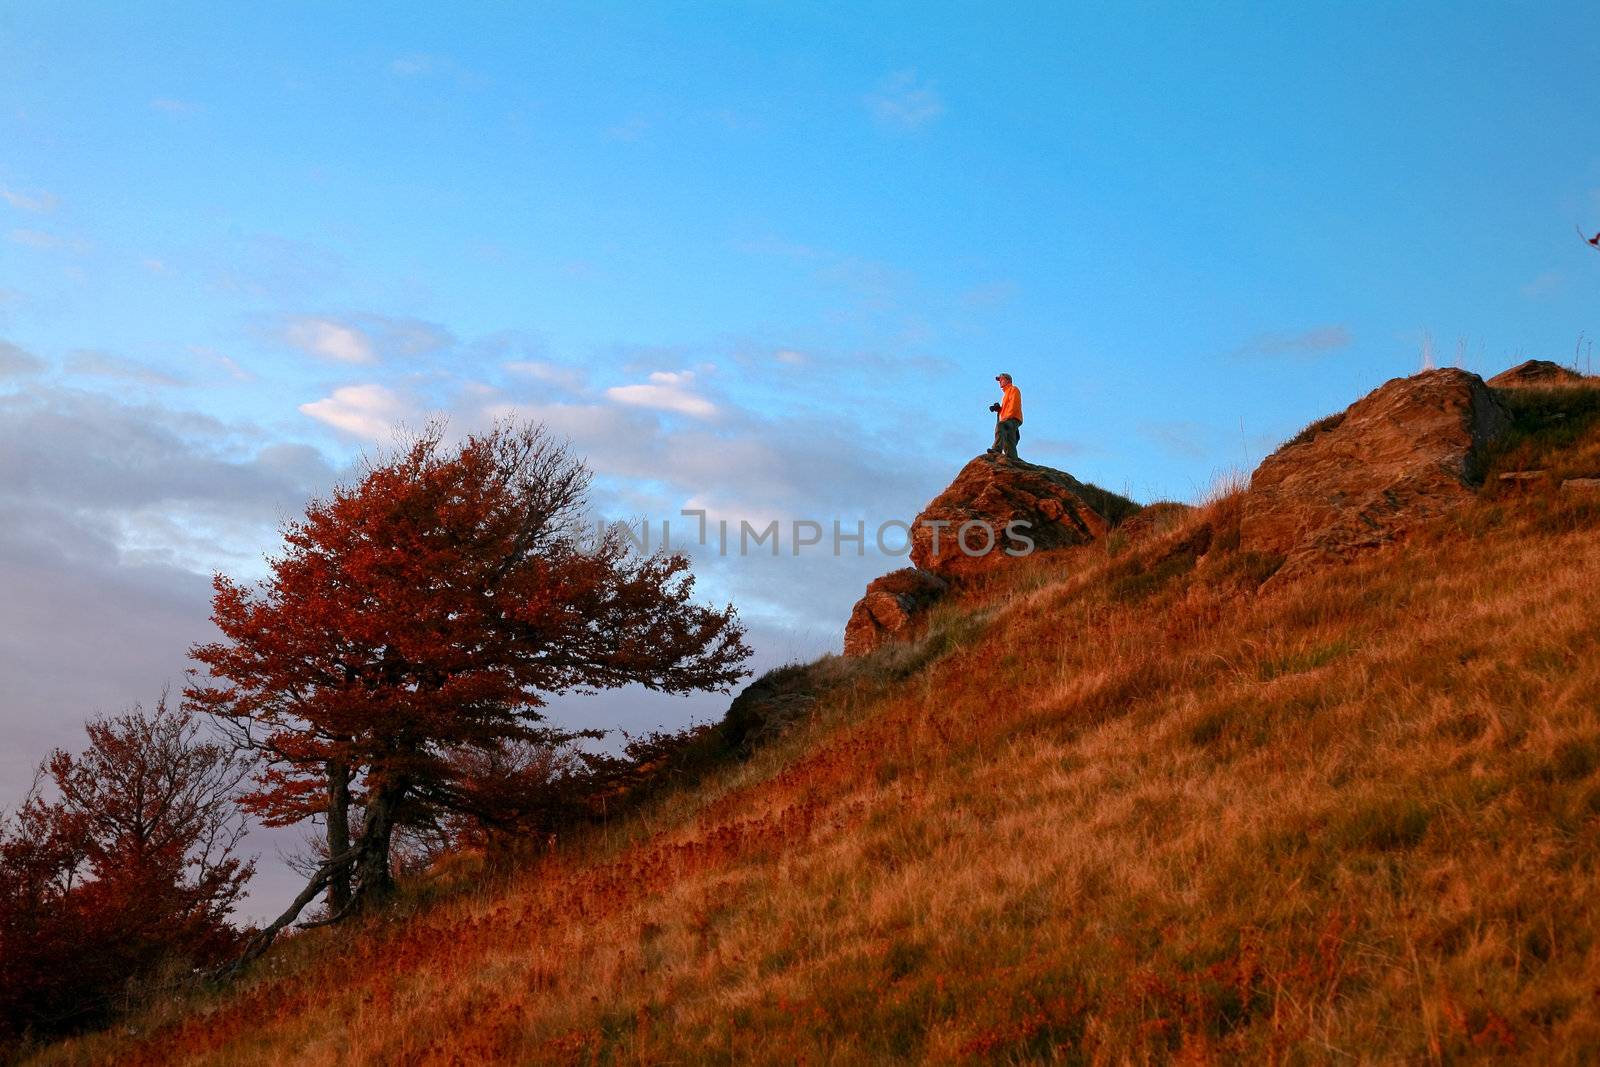 An image of a man walking in mountains